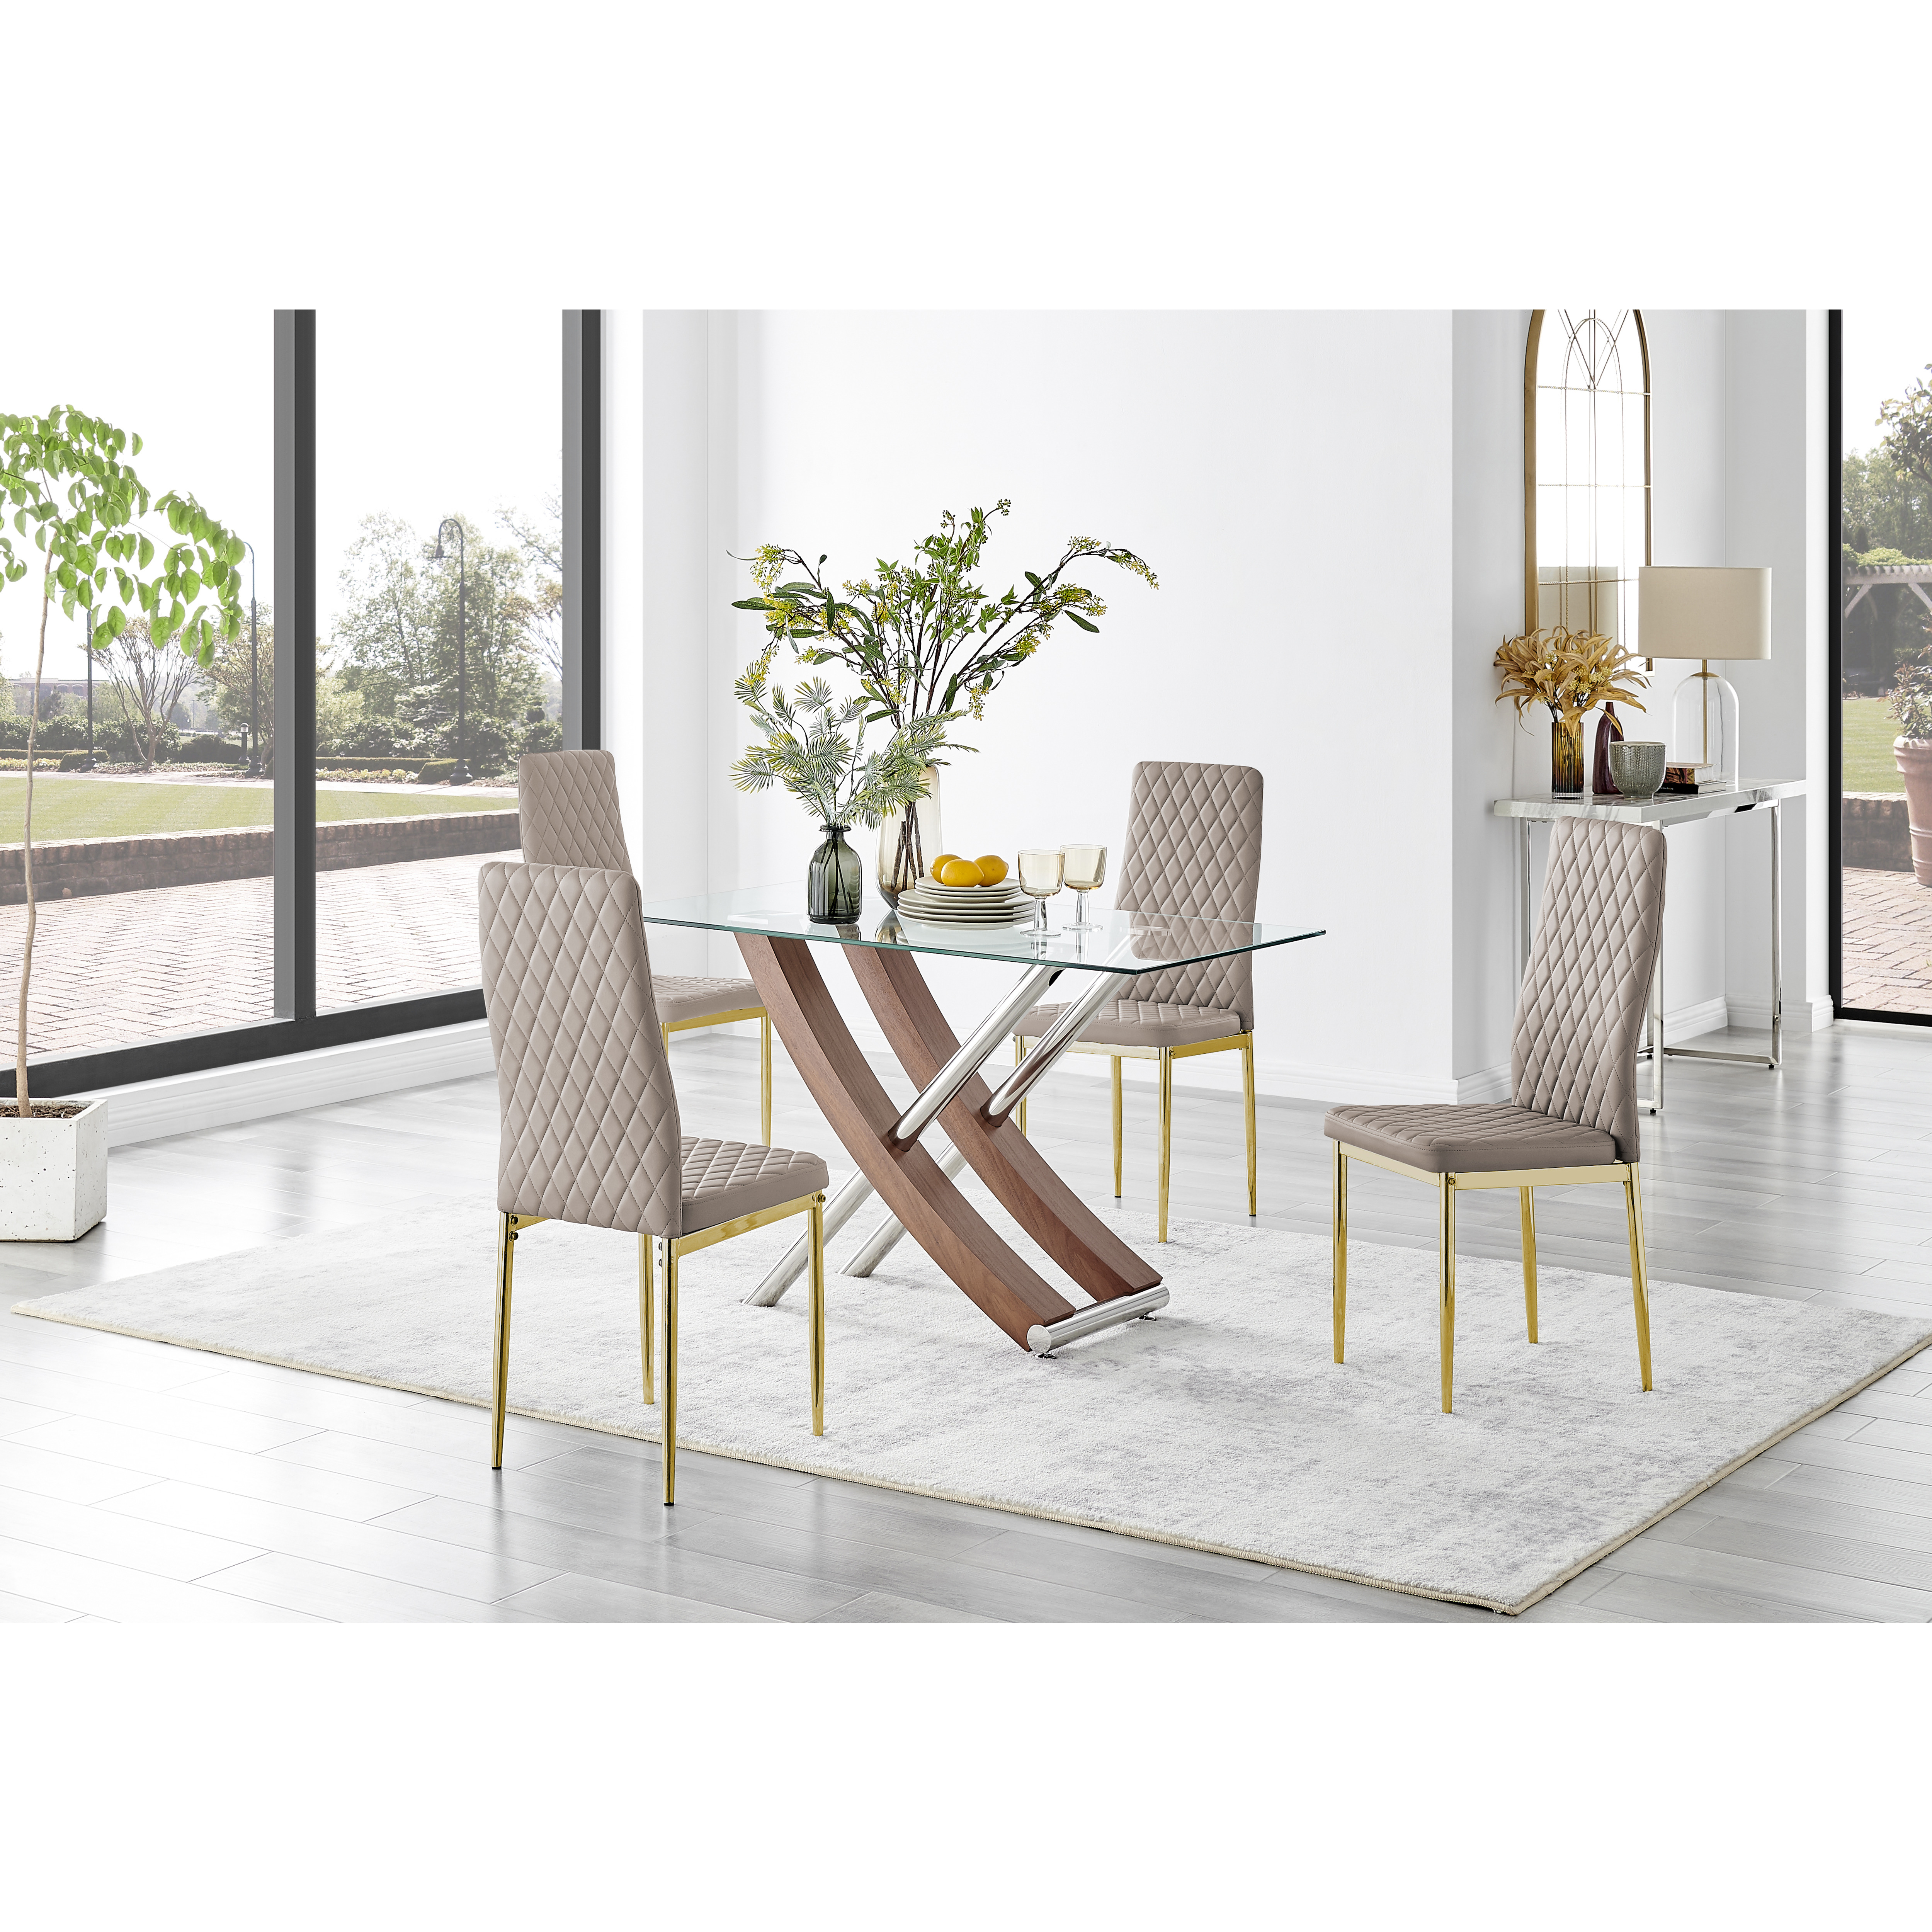 Mayfair Glass & Brown Wood Effect Dining Table & 4 Milan Gold Leg Chairs